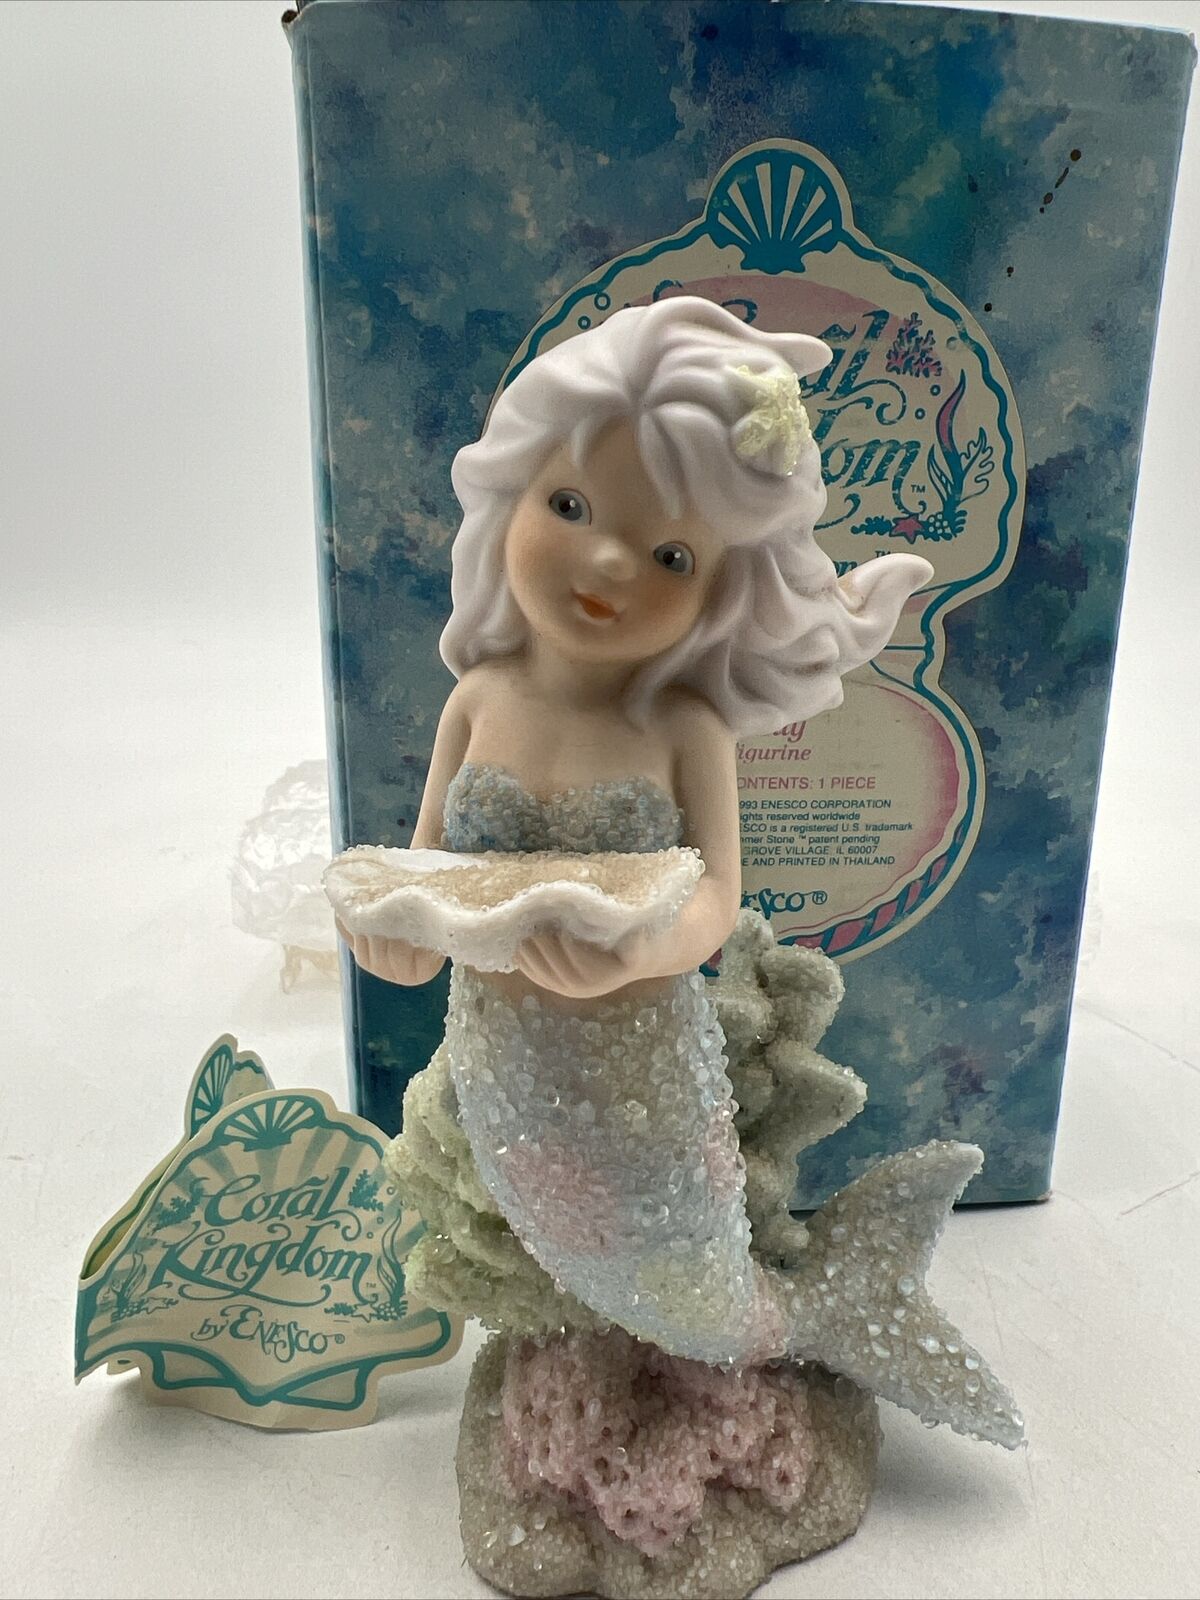 Enesco Coral Kingdom Shimmer Stone- Shelly 533106 1993 With Box 